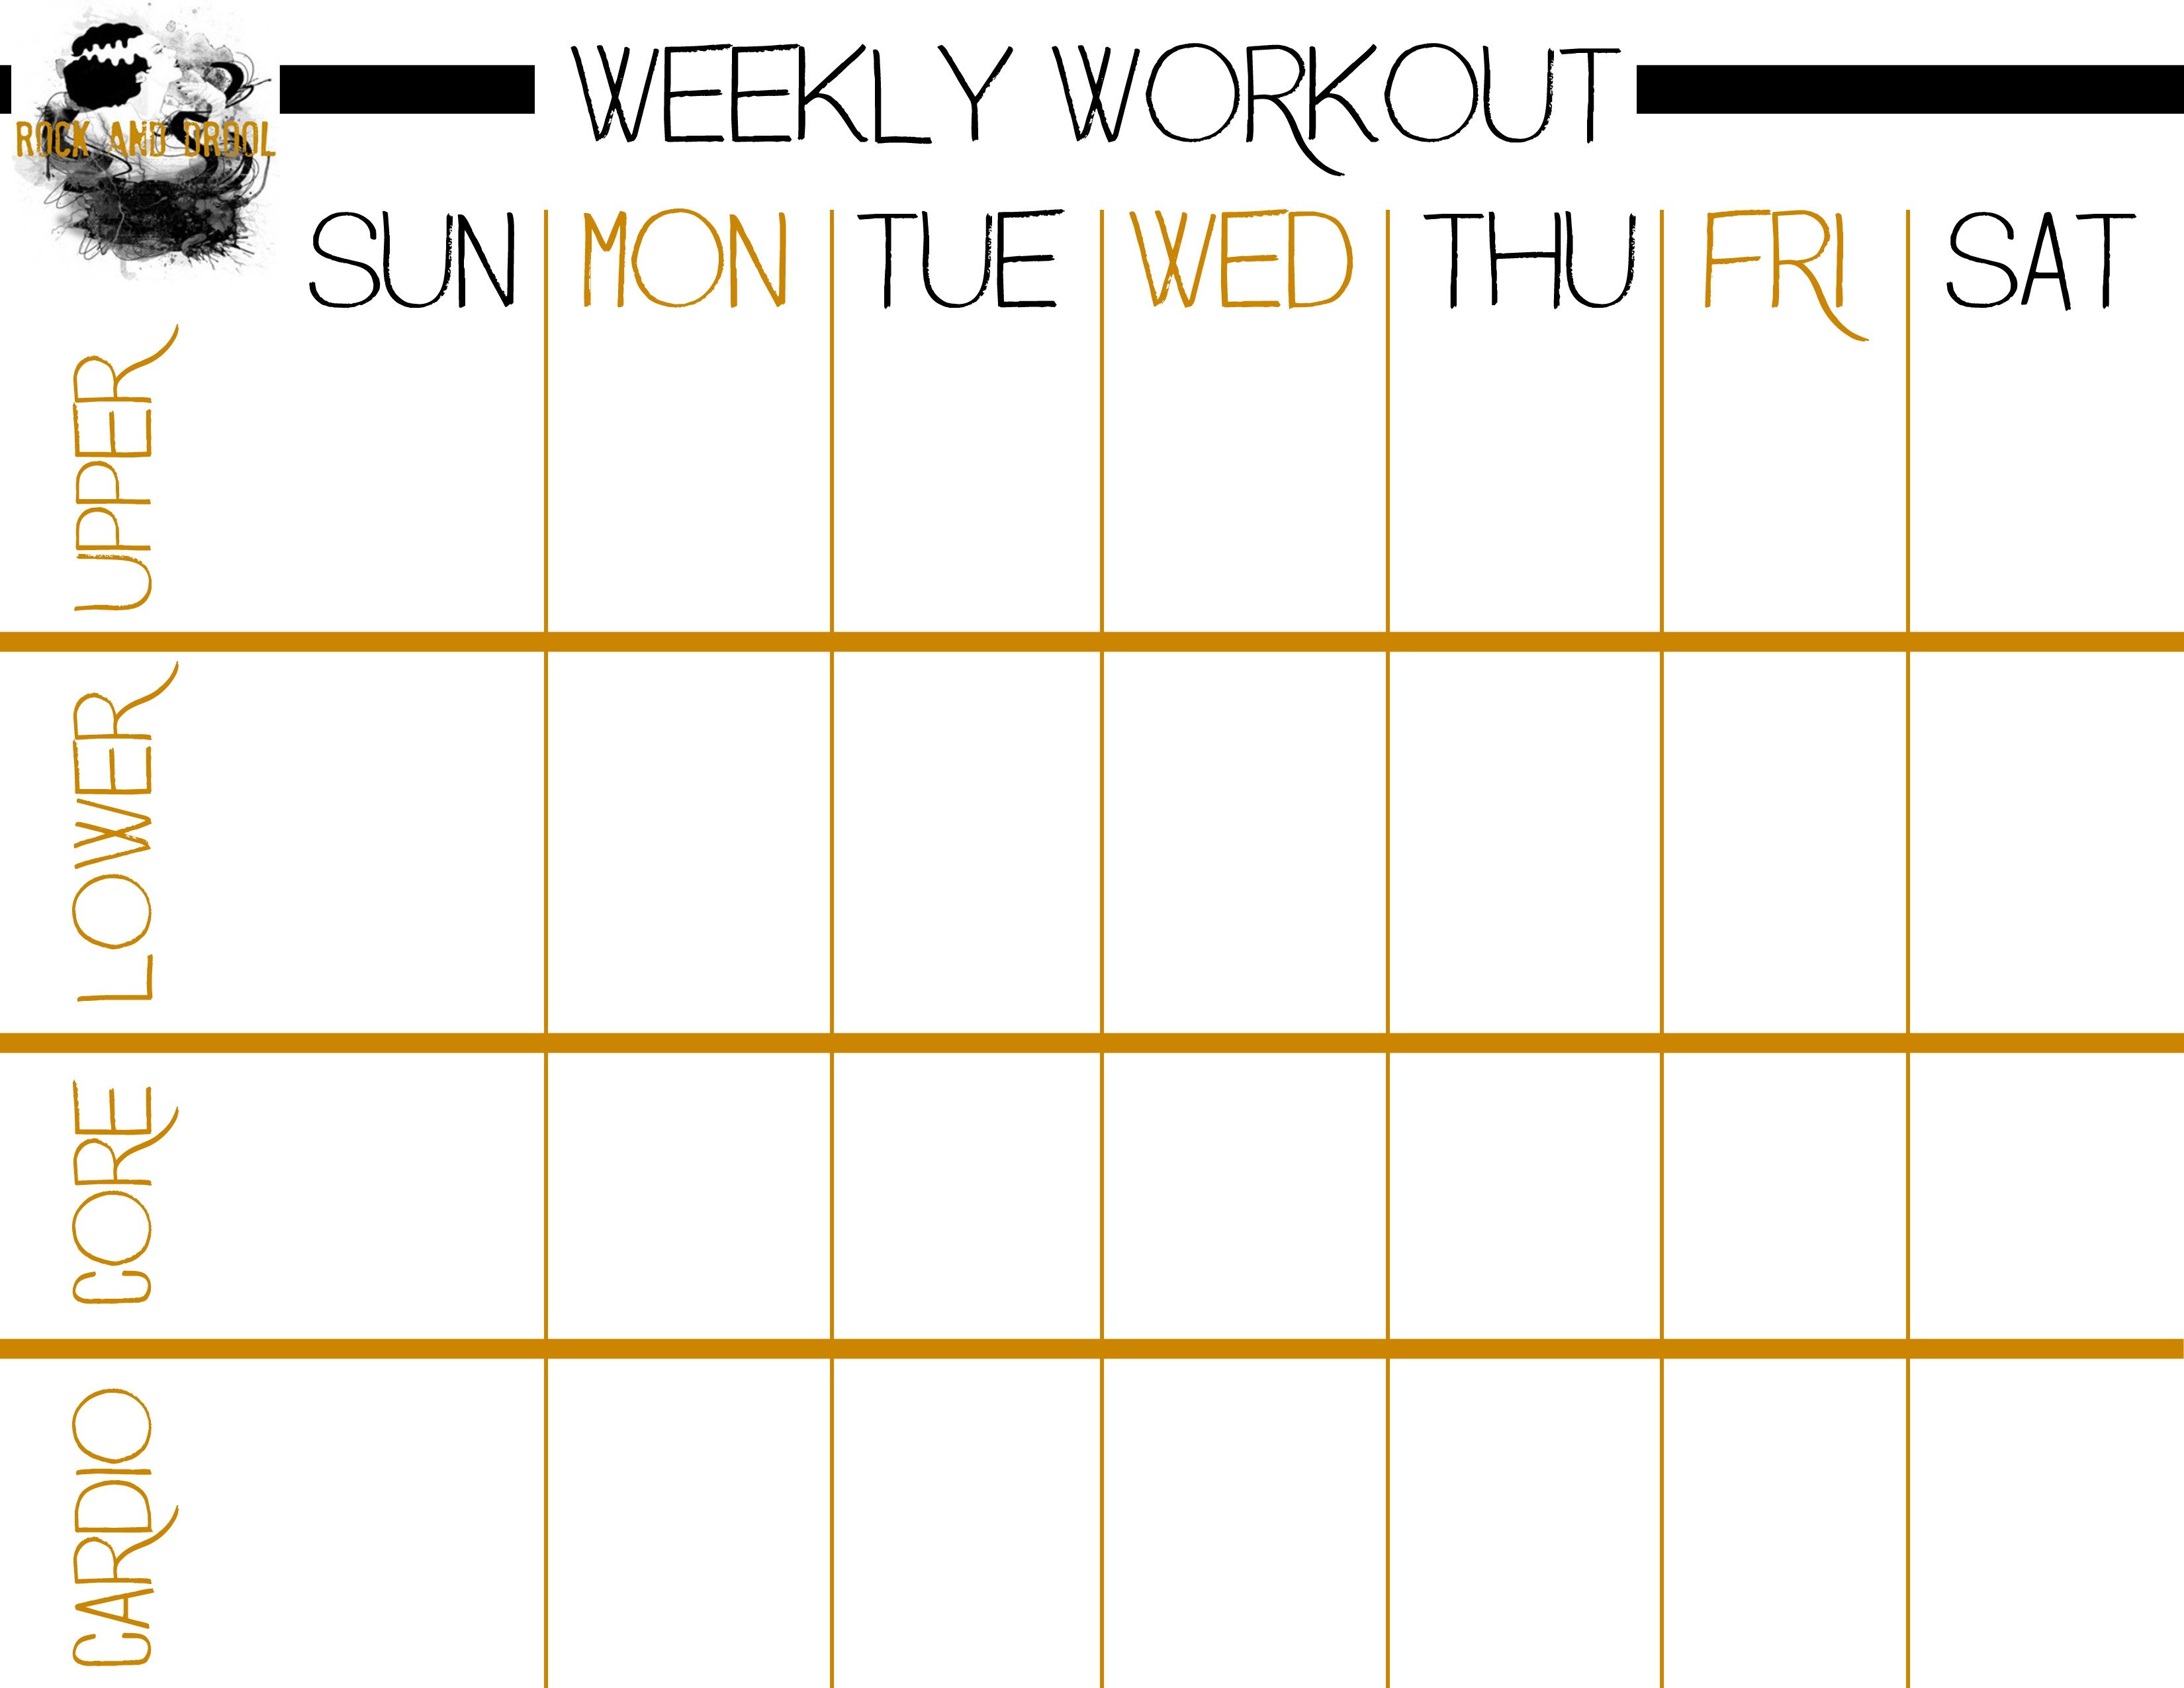 Printable Work Out Routines Unique Basic Full Body Workout Plus Free - Free Printable Workout Routines